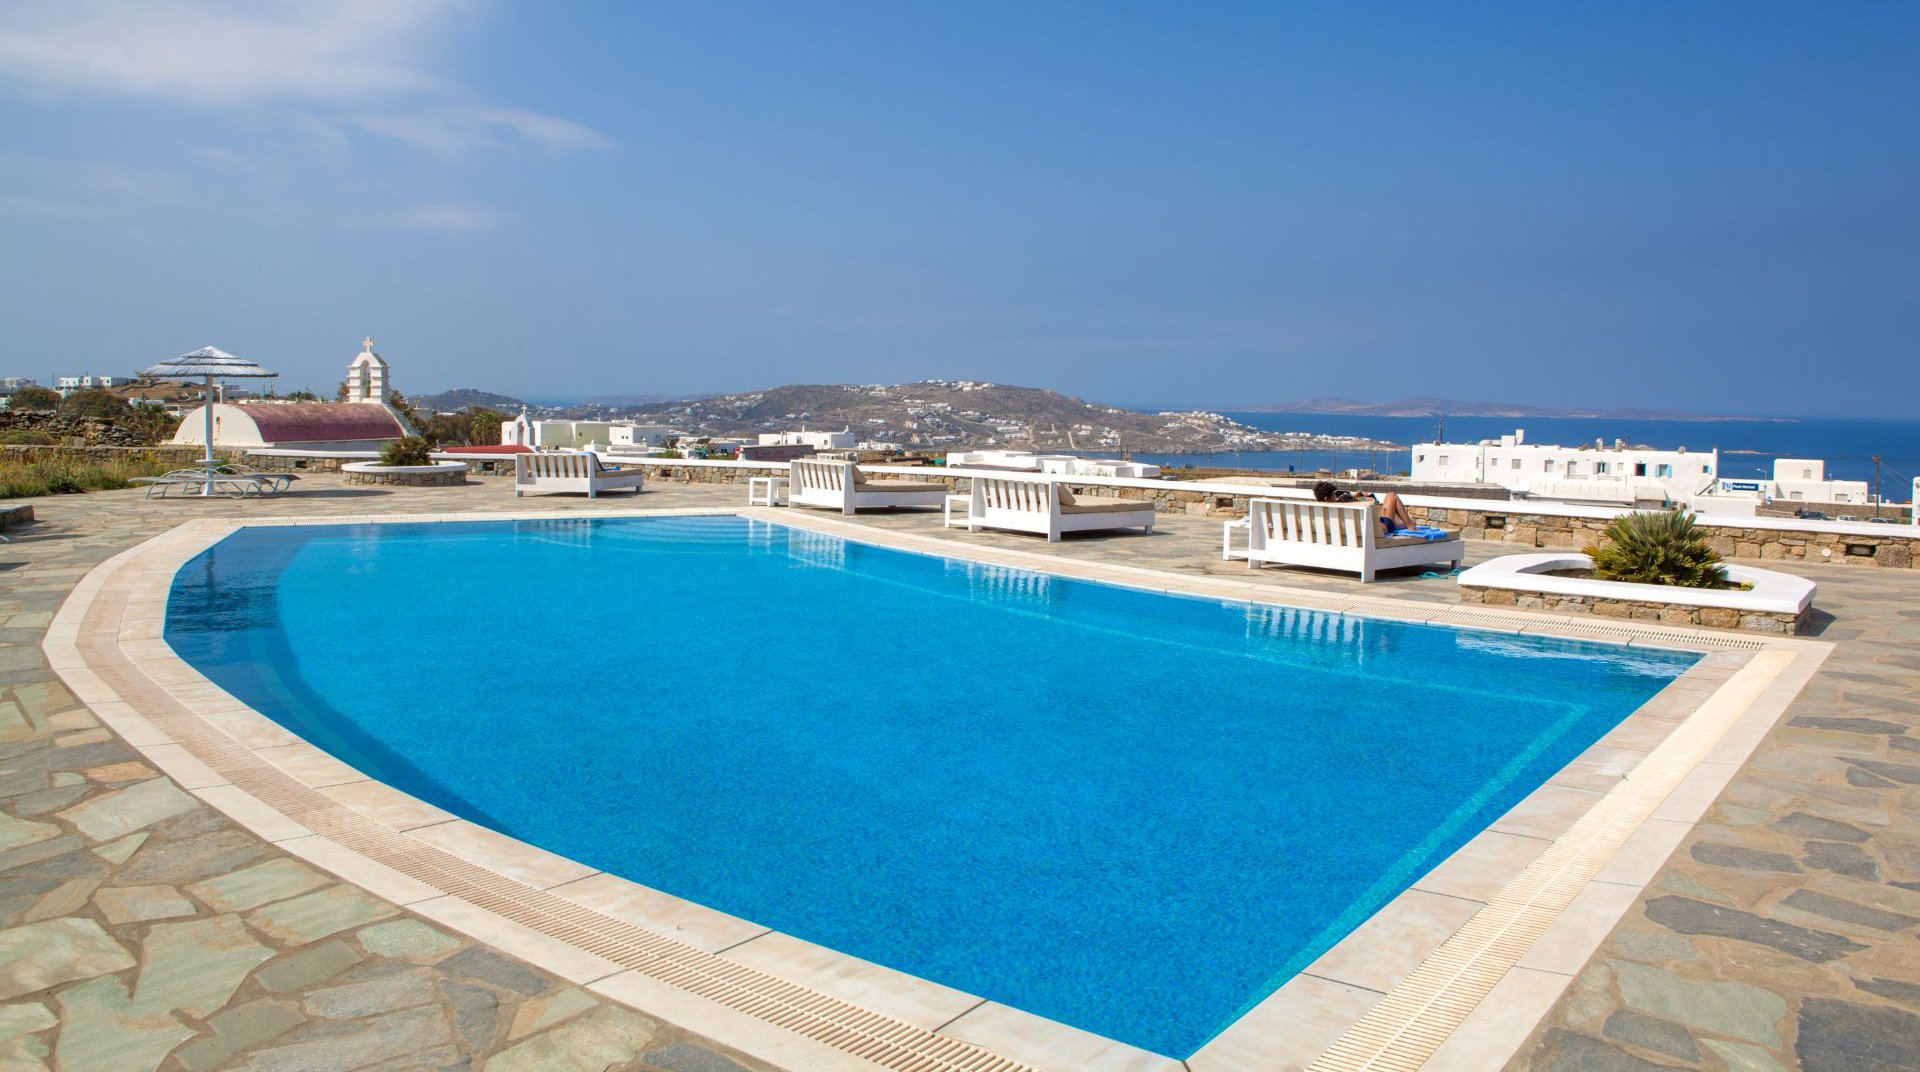 Our pool in sunset wing with overlooking Mykonos island